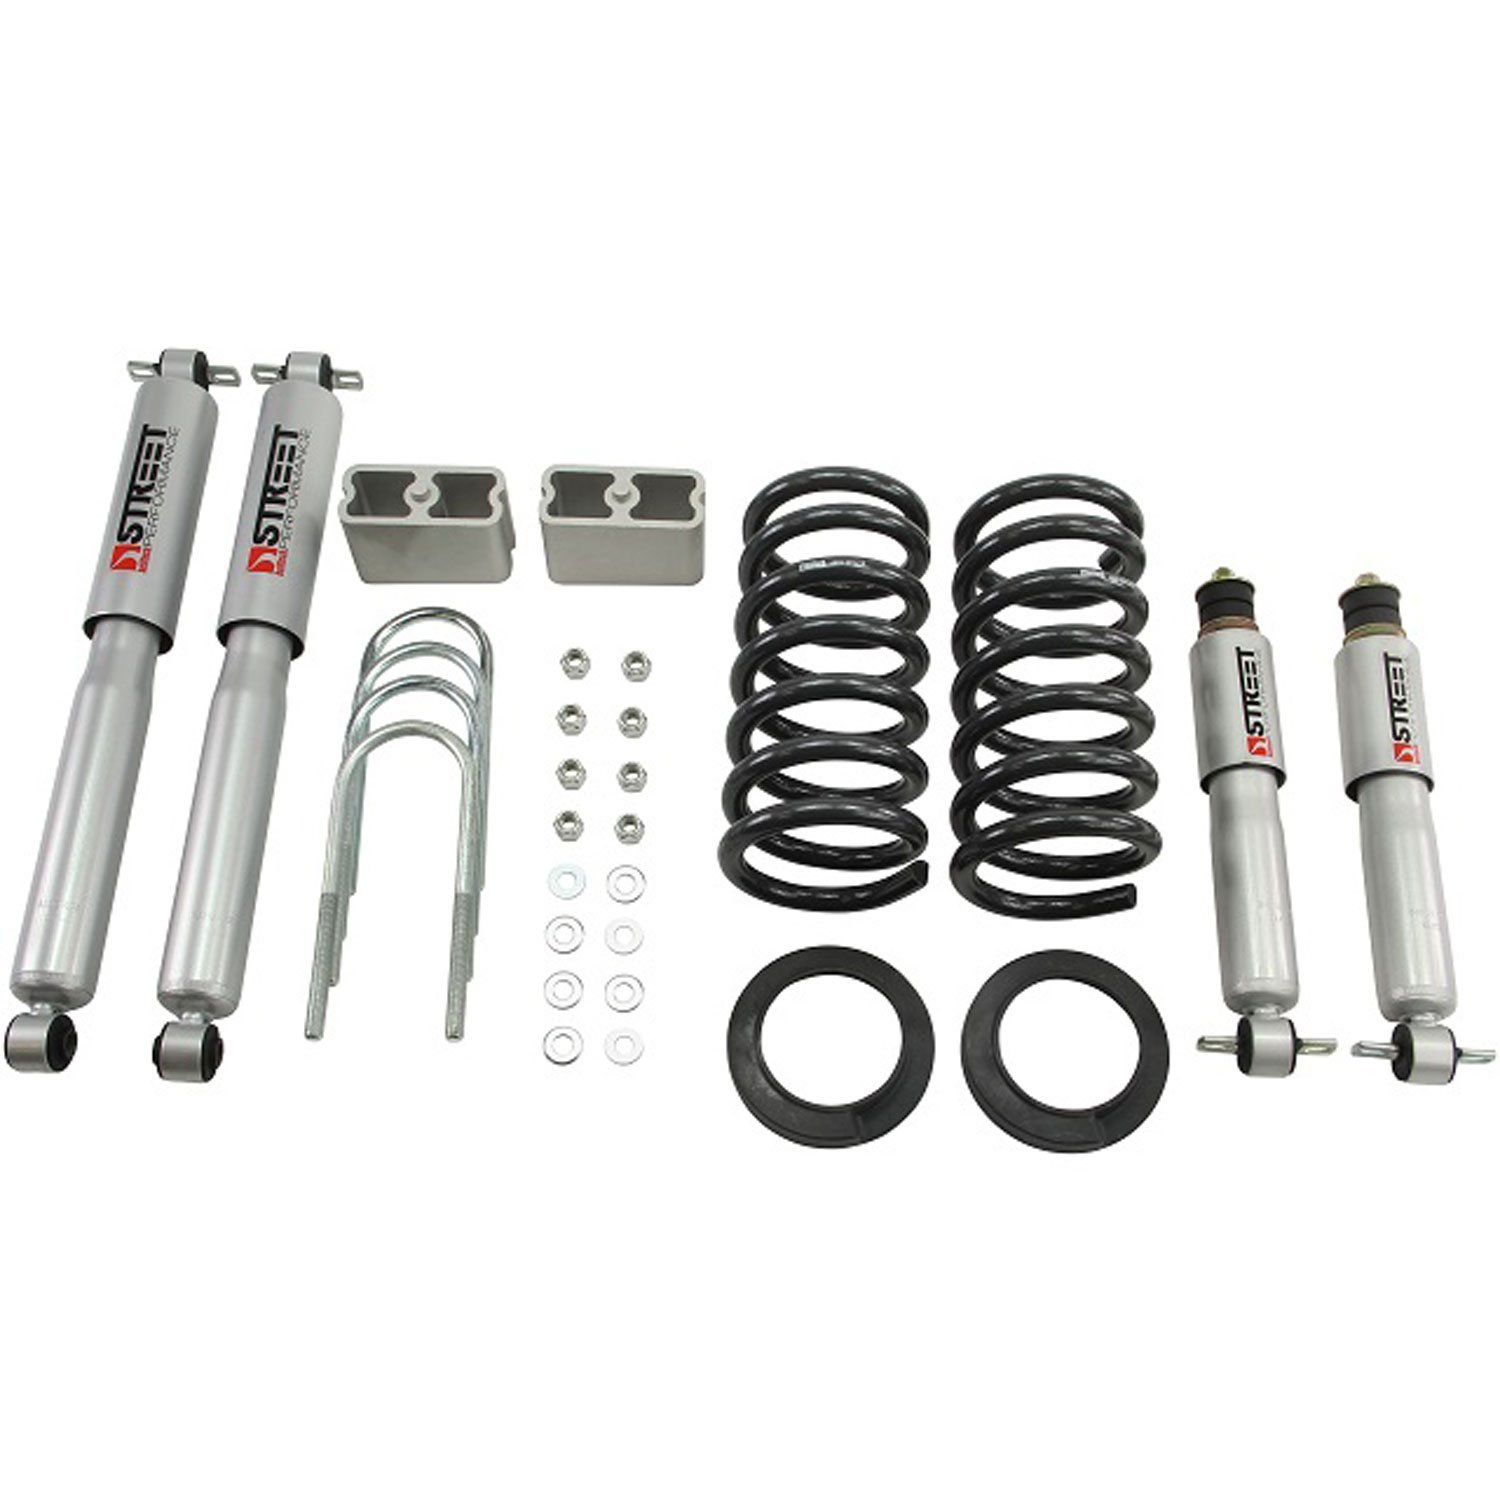 Complete Lowering Kit for 1982-2004 Chevy S10/GMC S15/Sonoma